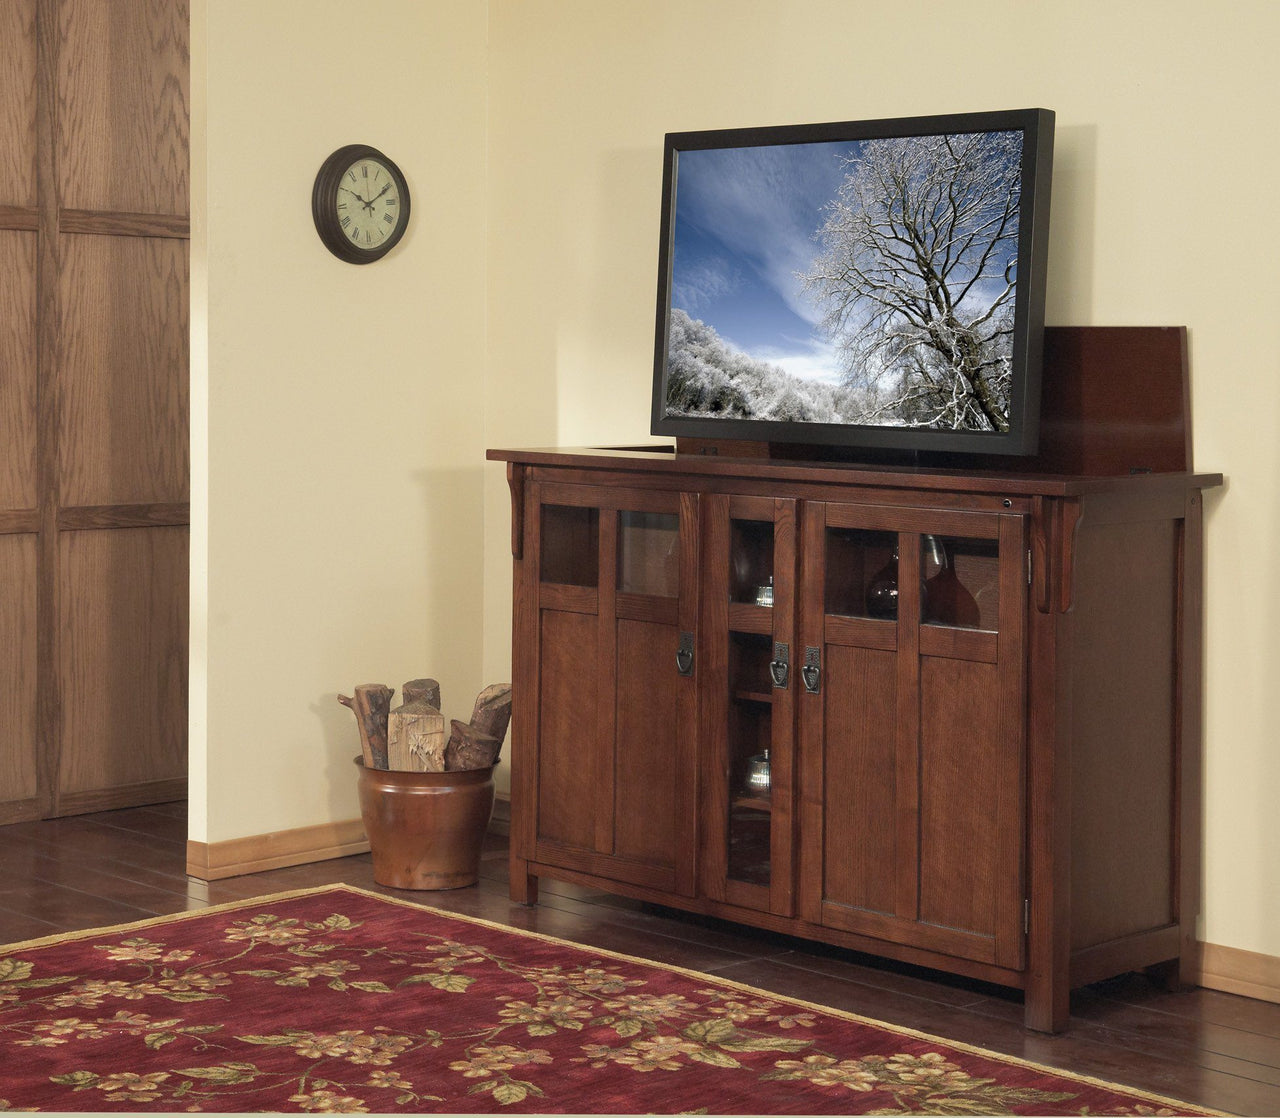 Touchstone Bungalow Full Size Lift Cabinets For Up To 60” Flat Screen Tv’S Tv Lift Cabinets Touchstone 